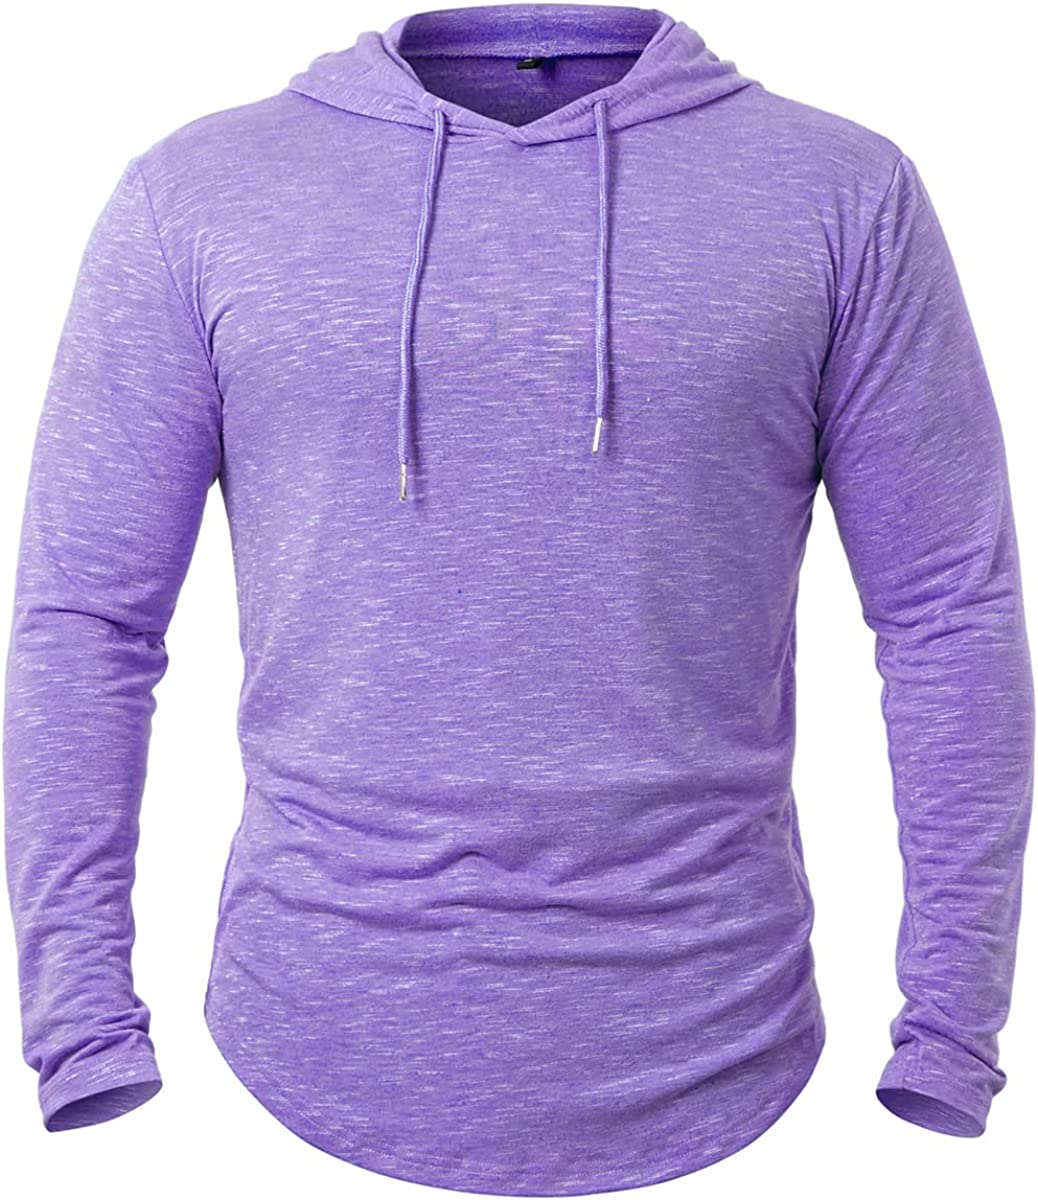 MANSDOUR Men's Athletic Hooded Shirts Long Sleeve Workout Sport